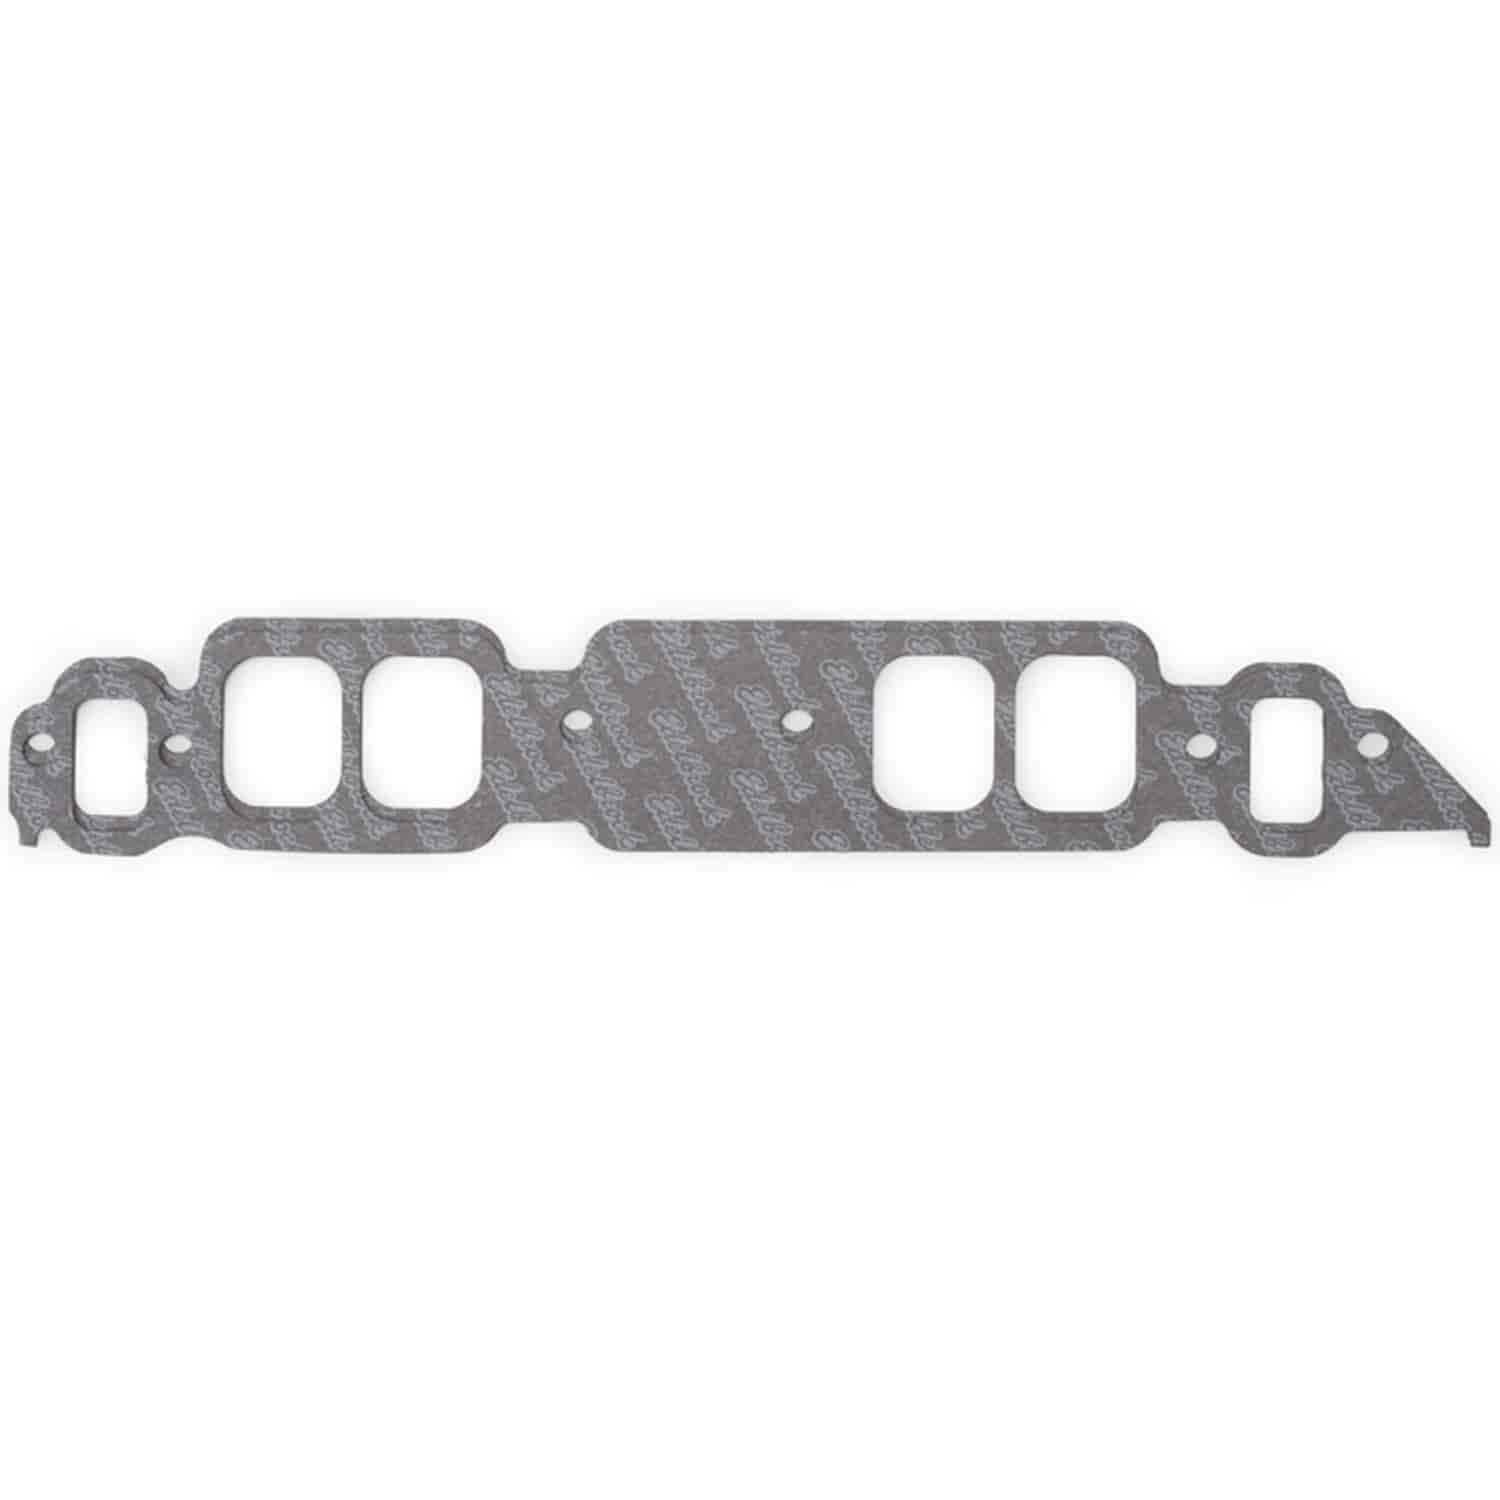 Intake Gaskets for Rectangle Port Big Block Chevy 396-454